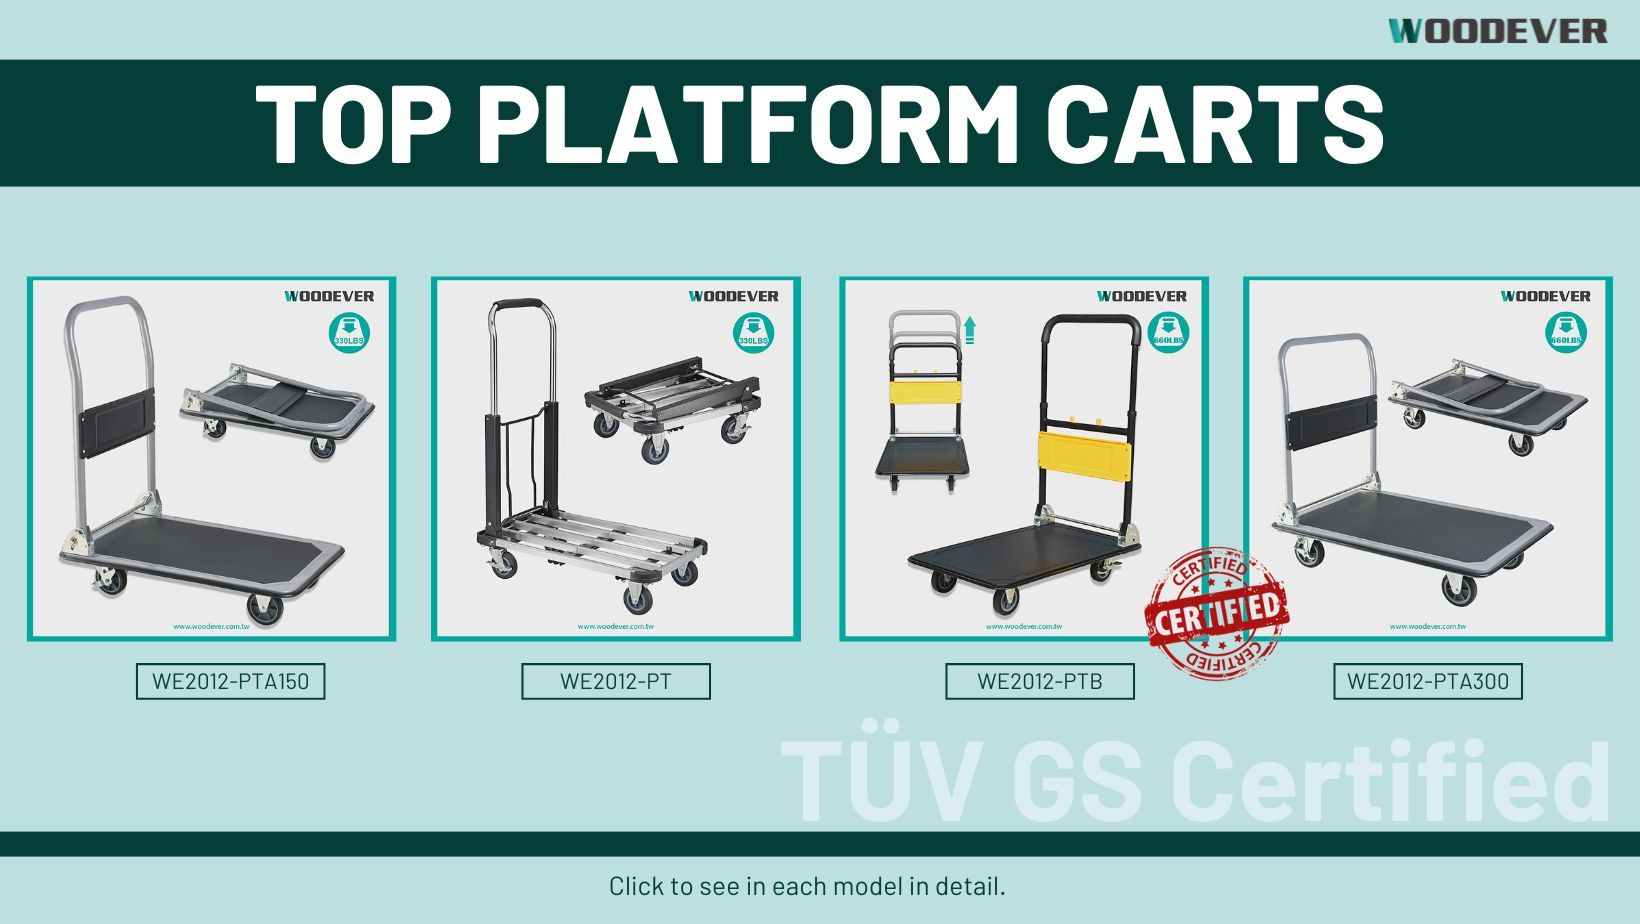 The carts have been approved by inspection institutions and carry GS product safety marks and certification. WOODEVER also offers customized hand trucks based on each client's specifications.